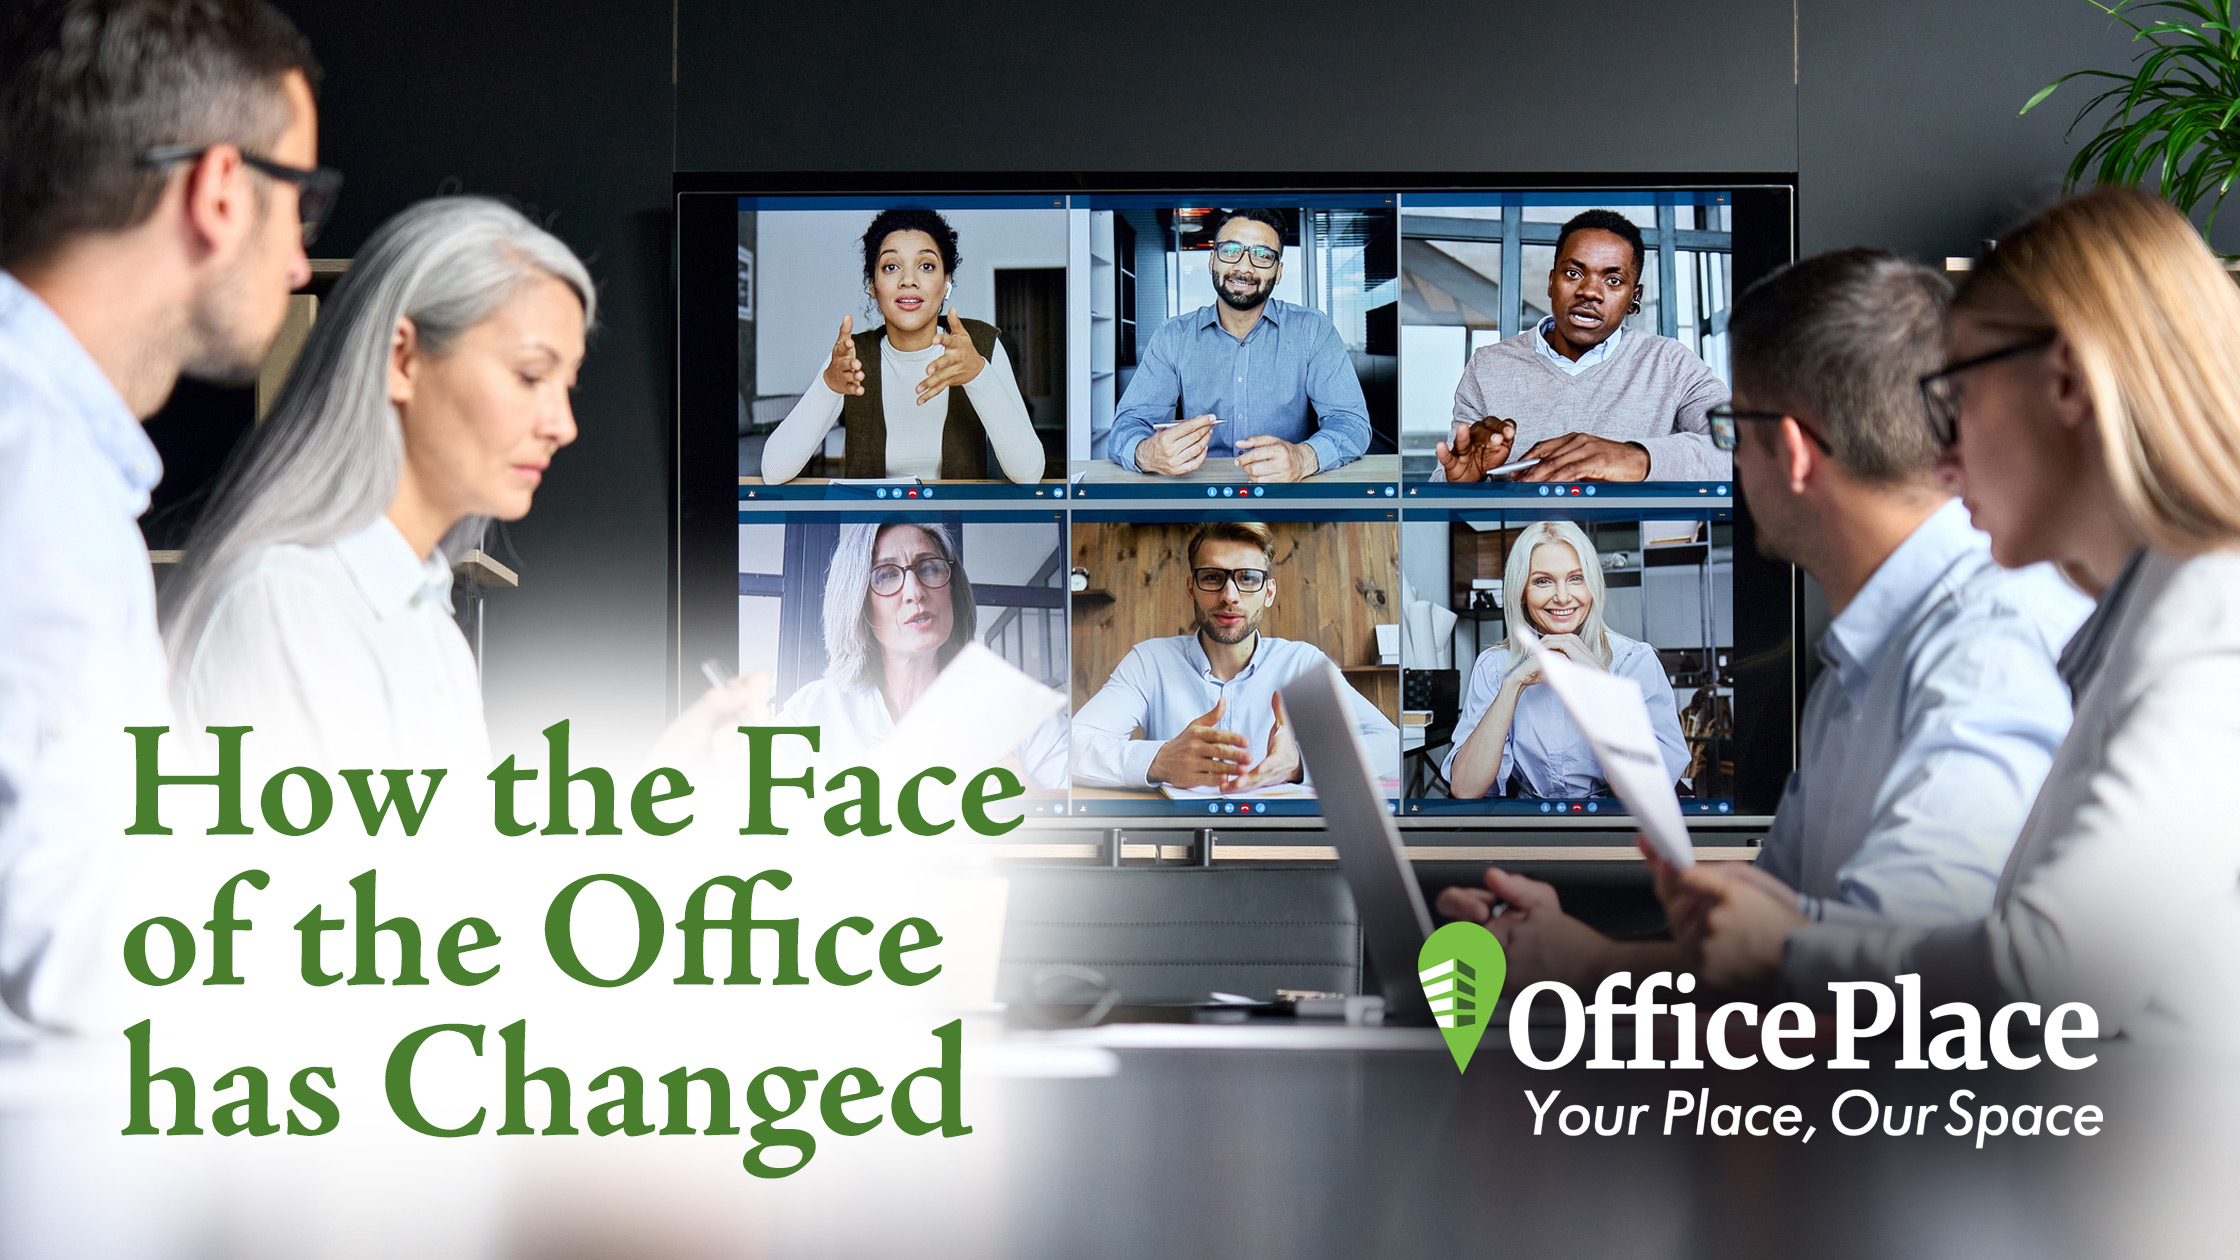 How the Face of the Office has Changed